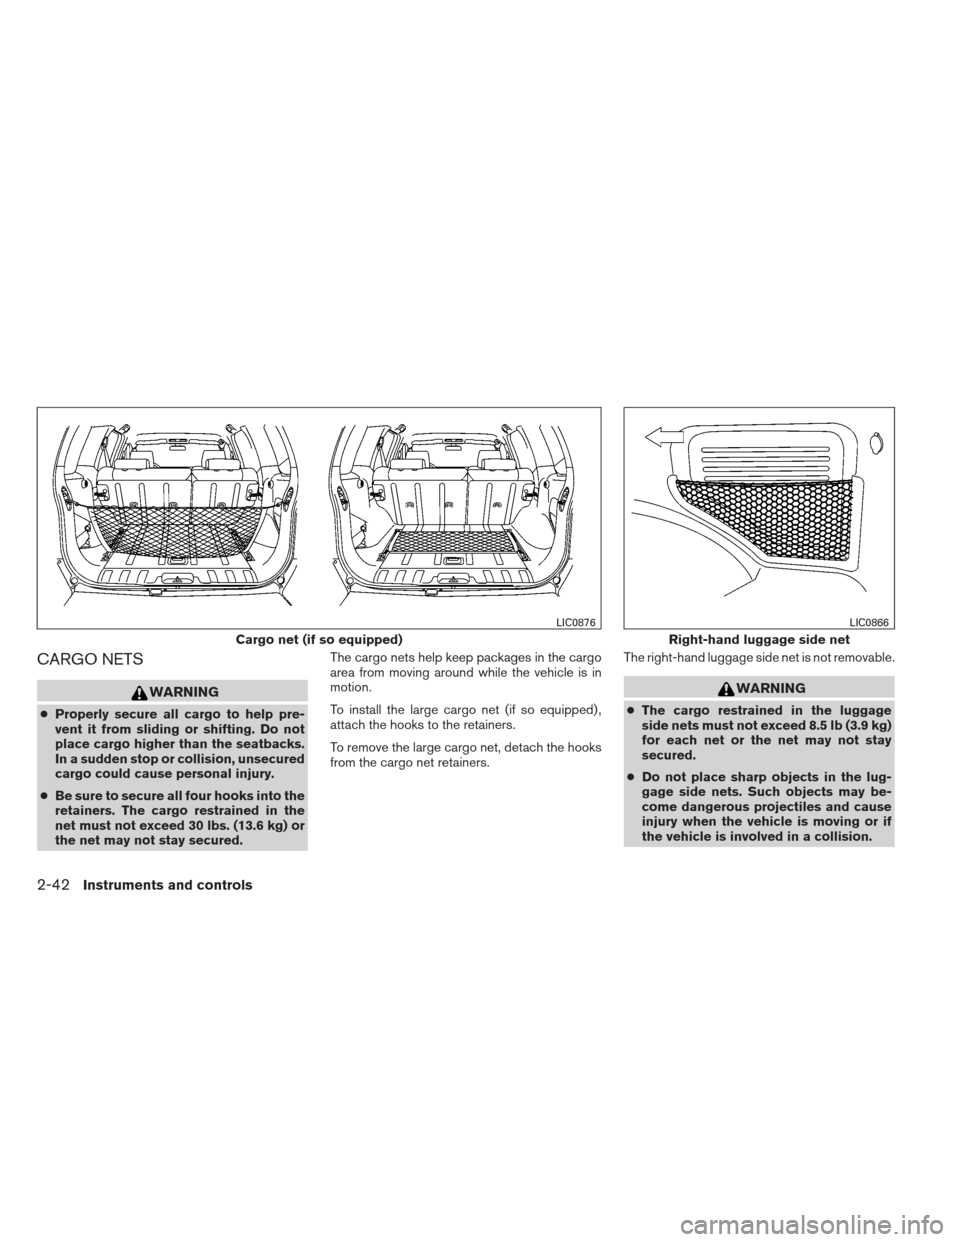 NISSAN XTERRA 2012 N50 / 2.G Owners Manual CARGO NETS
WARNING
●Properly secure all cargo to help pre-
vent it from sliding or shifting. Do not
place cargo higher than the seatbacks.
In a sudden stop or collision, unsecured
cargo could cause 